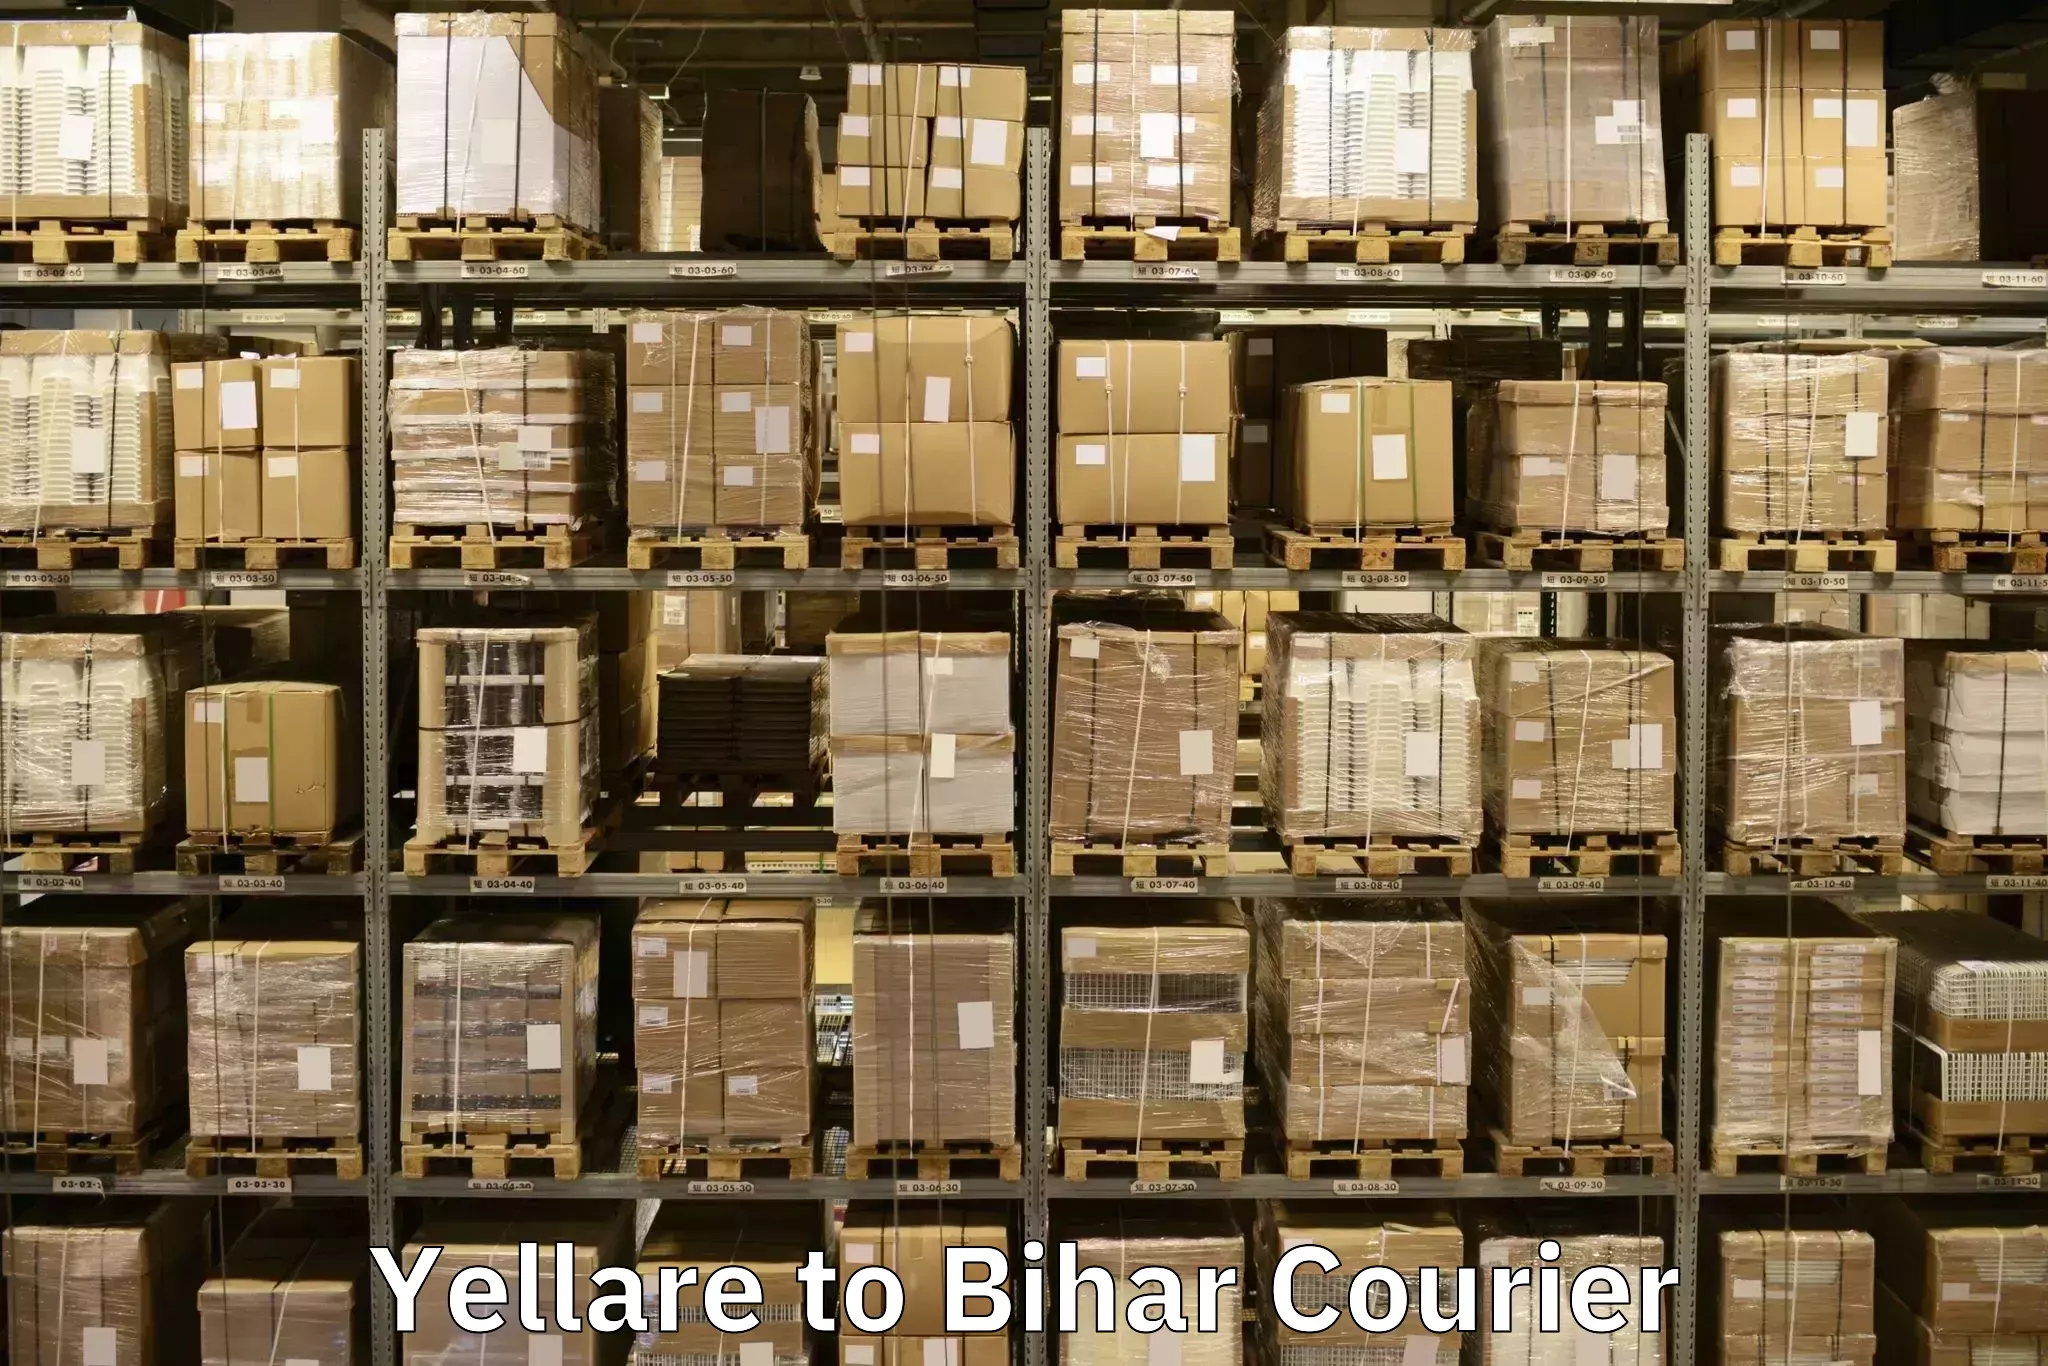 Trusted relocation experts Yellare to Birpur